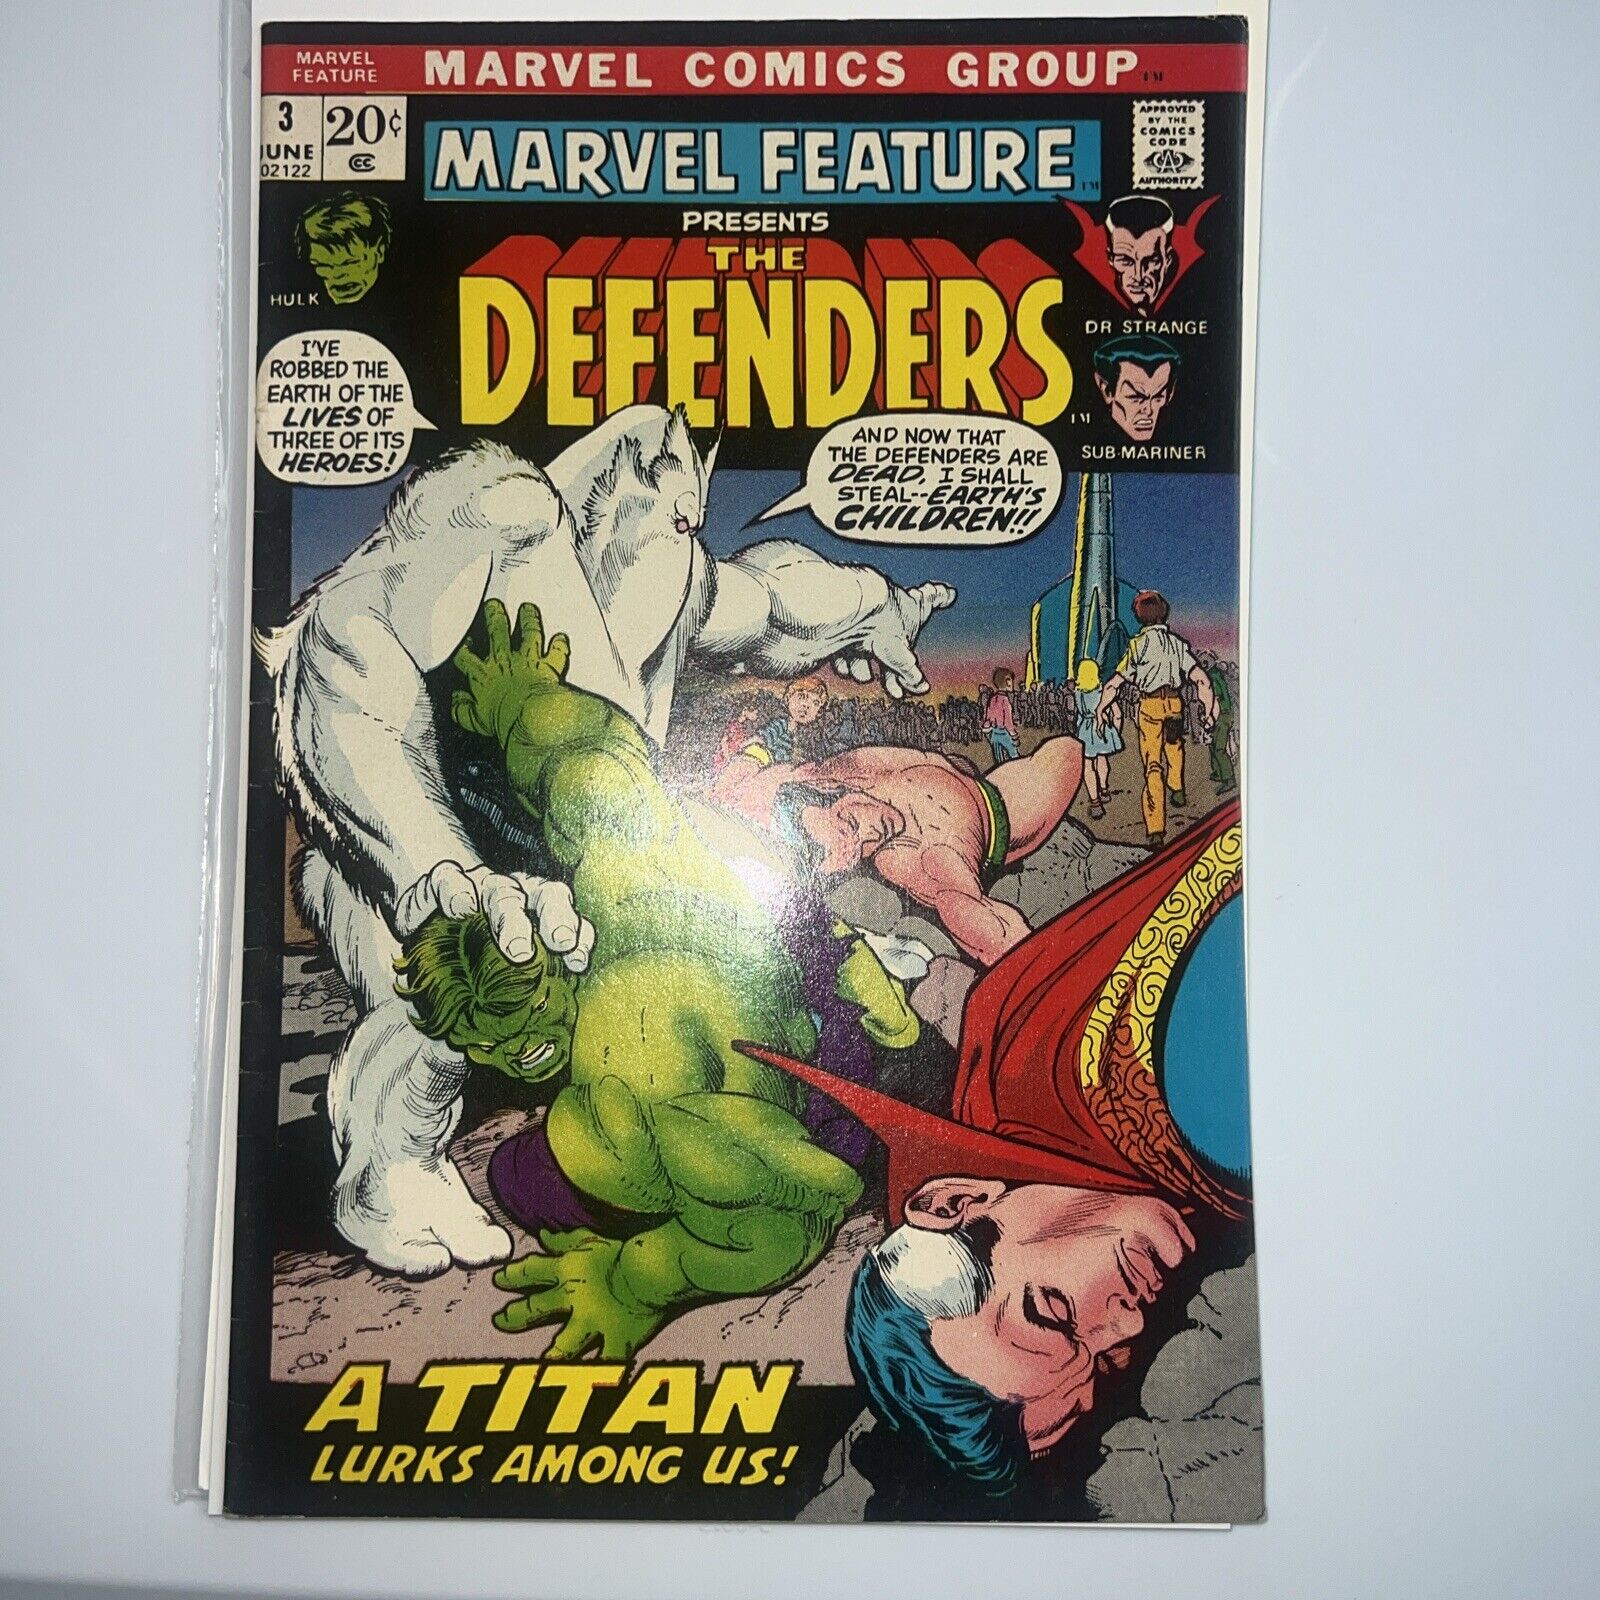 Marvel Feature #3 The Defenders